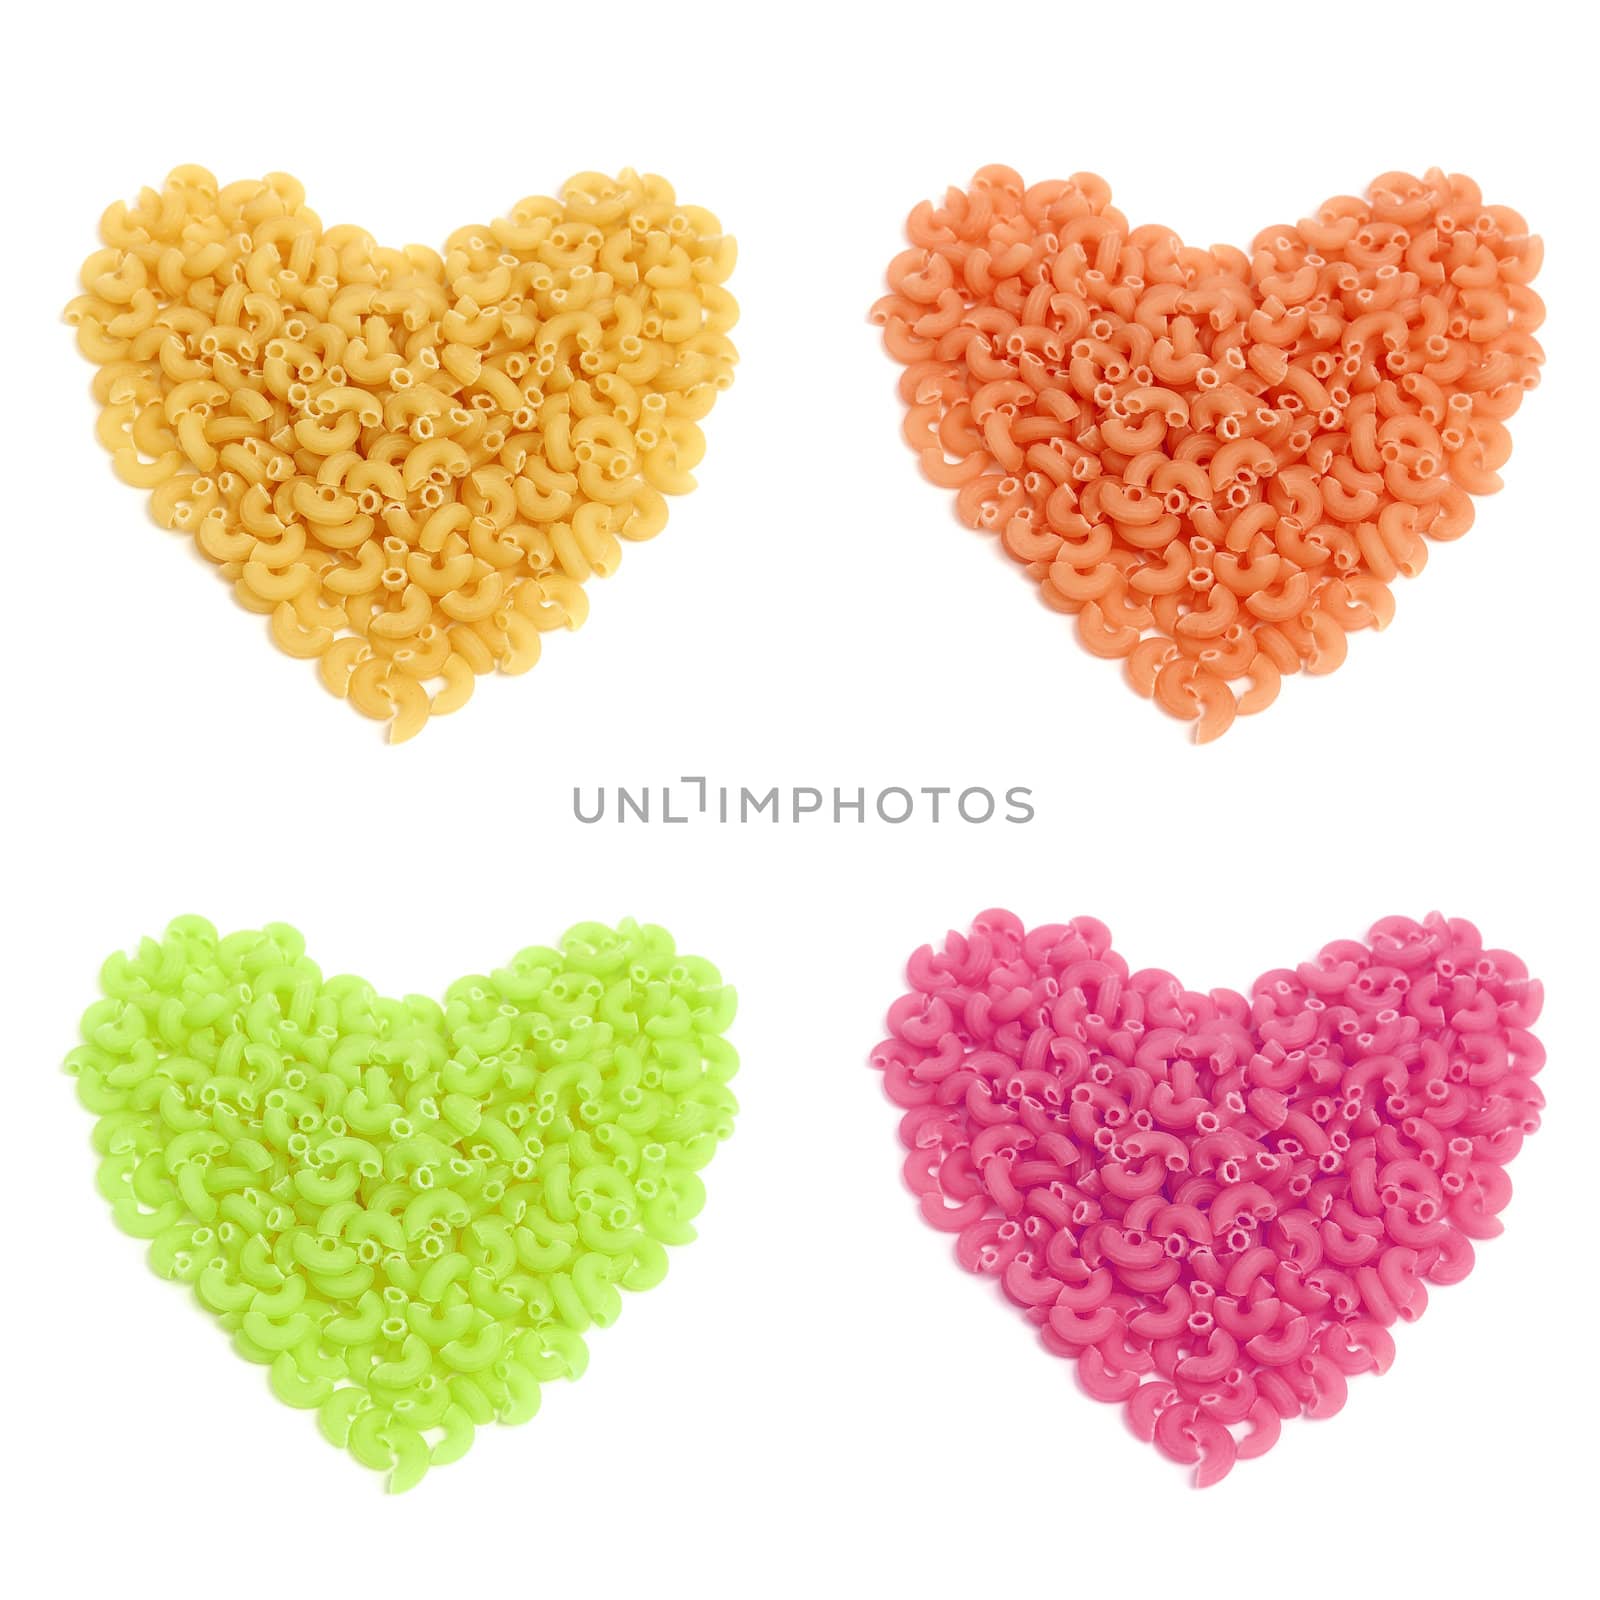 Colorful macaroni in heart shape by molly70photo